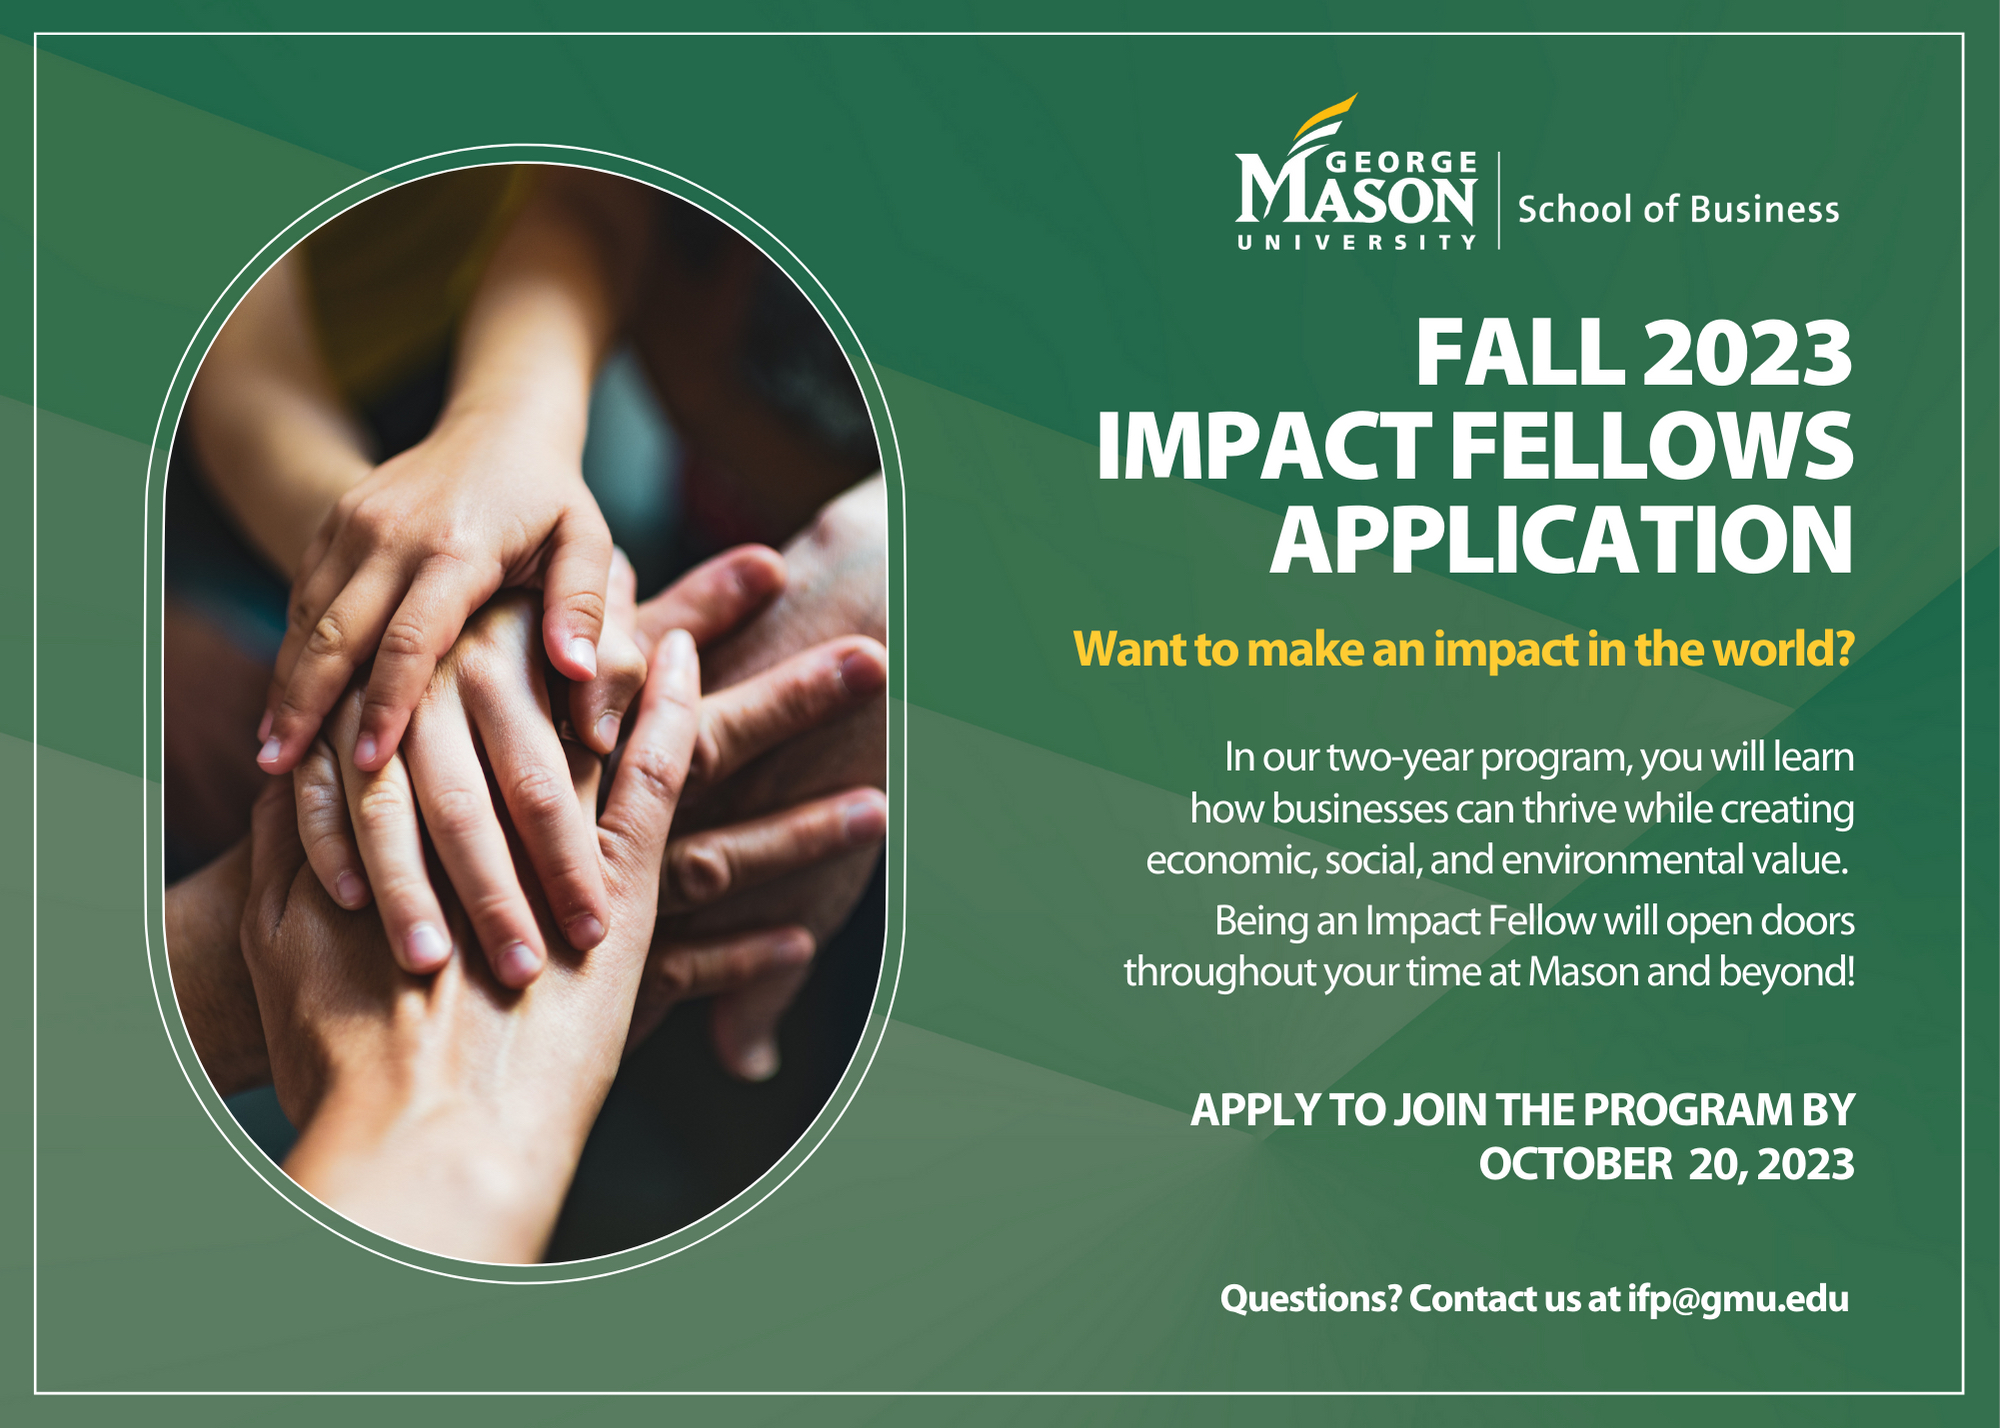 Application for Fall 2023 School of Business Impact Fellows Program due October 20. Questions contact ipf@gmu.edu